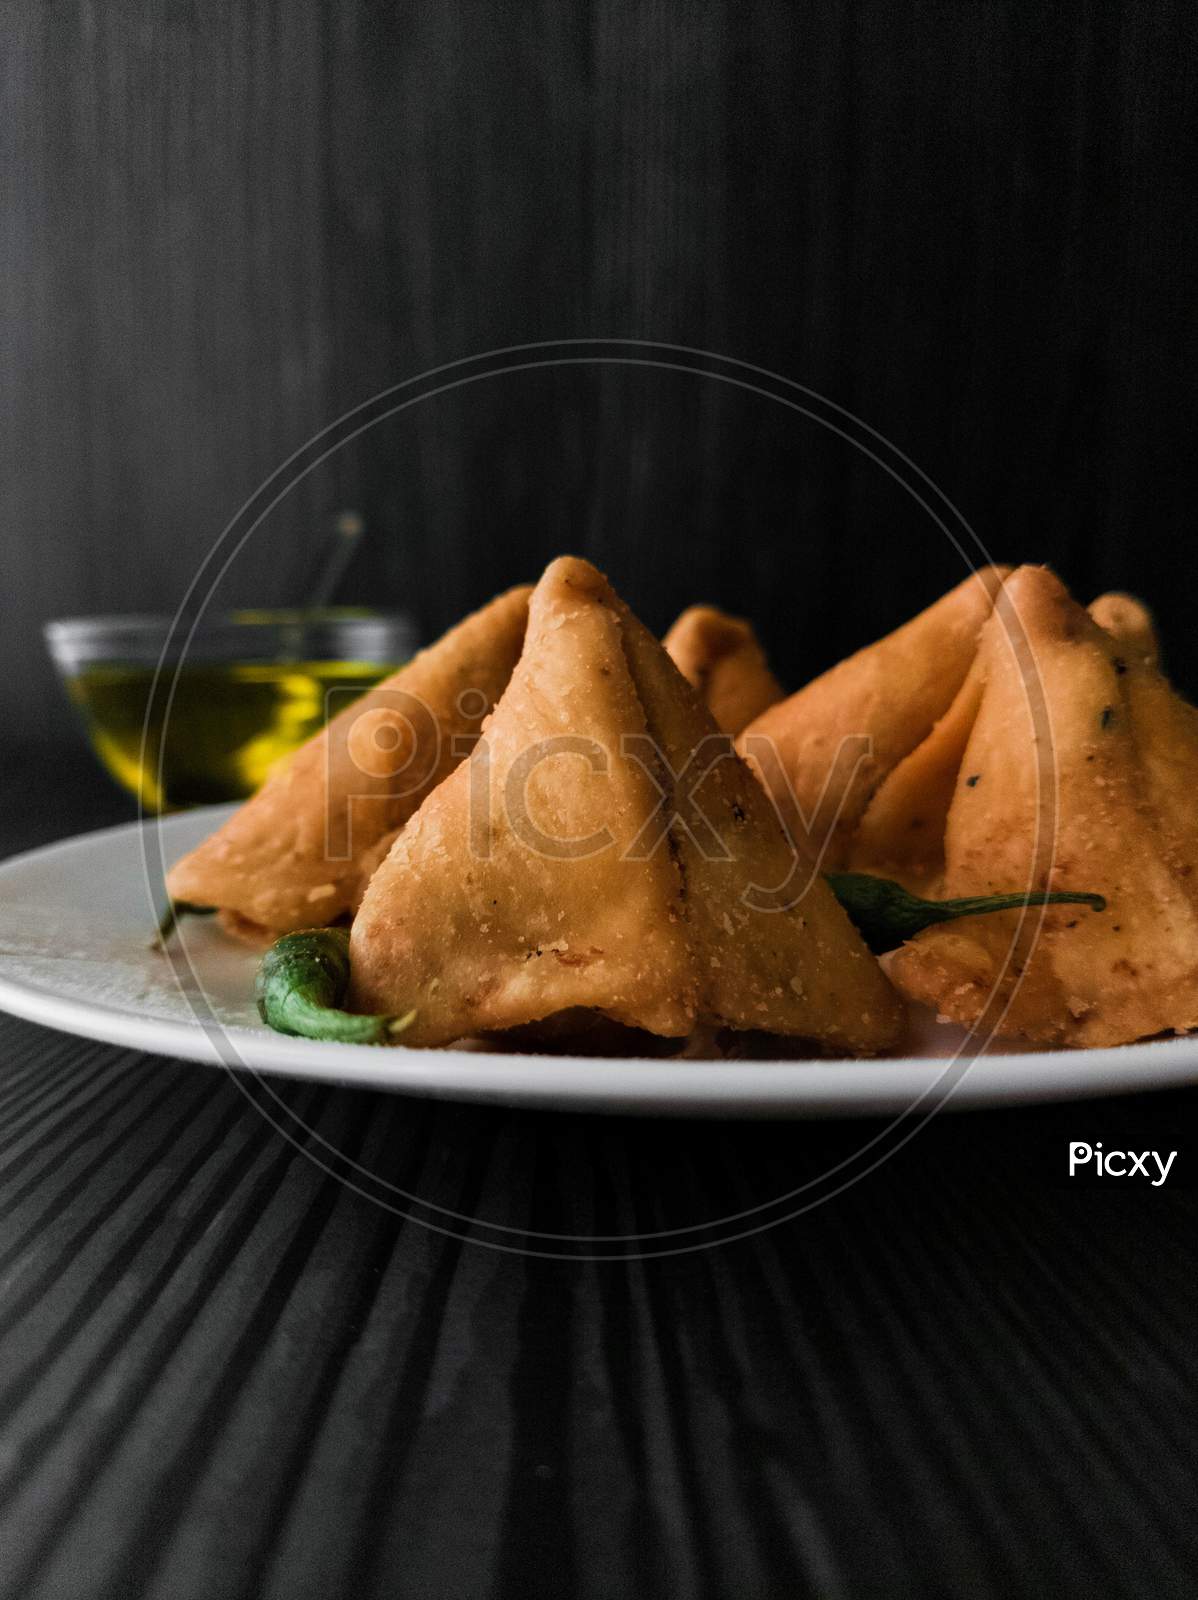 Samosa and green chilli served in a plate